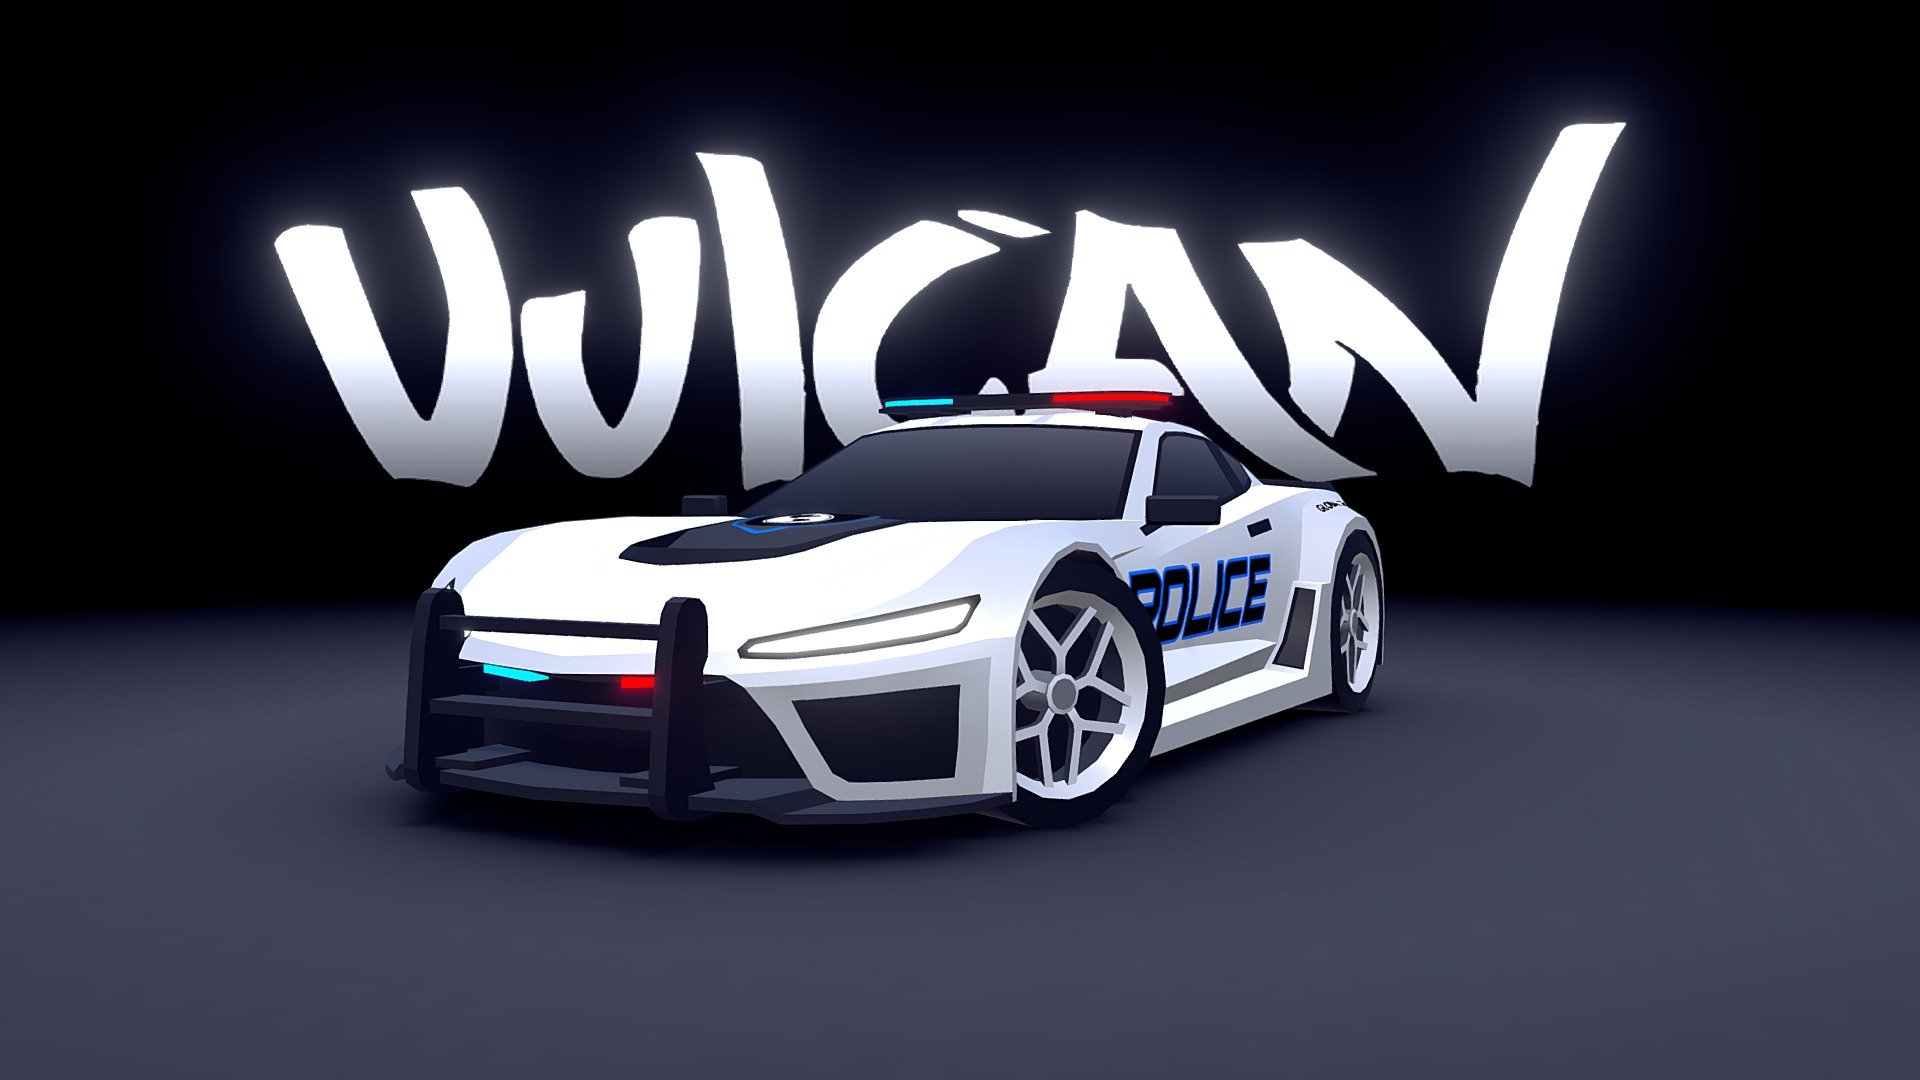 Recently I've heard some rumors about a remake of NFS: Most Wanted (I don't know if that will become true). 

That is one of my favorite racing games of all time, and I wanted to include a police car inspired by that iconic police white Corvette. It is going to be included in the August update of ARCADE: Ultimate Vehicles Pack. I hope you like it.

Best regards,
Mena 3d model